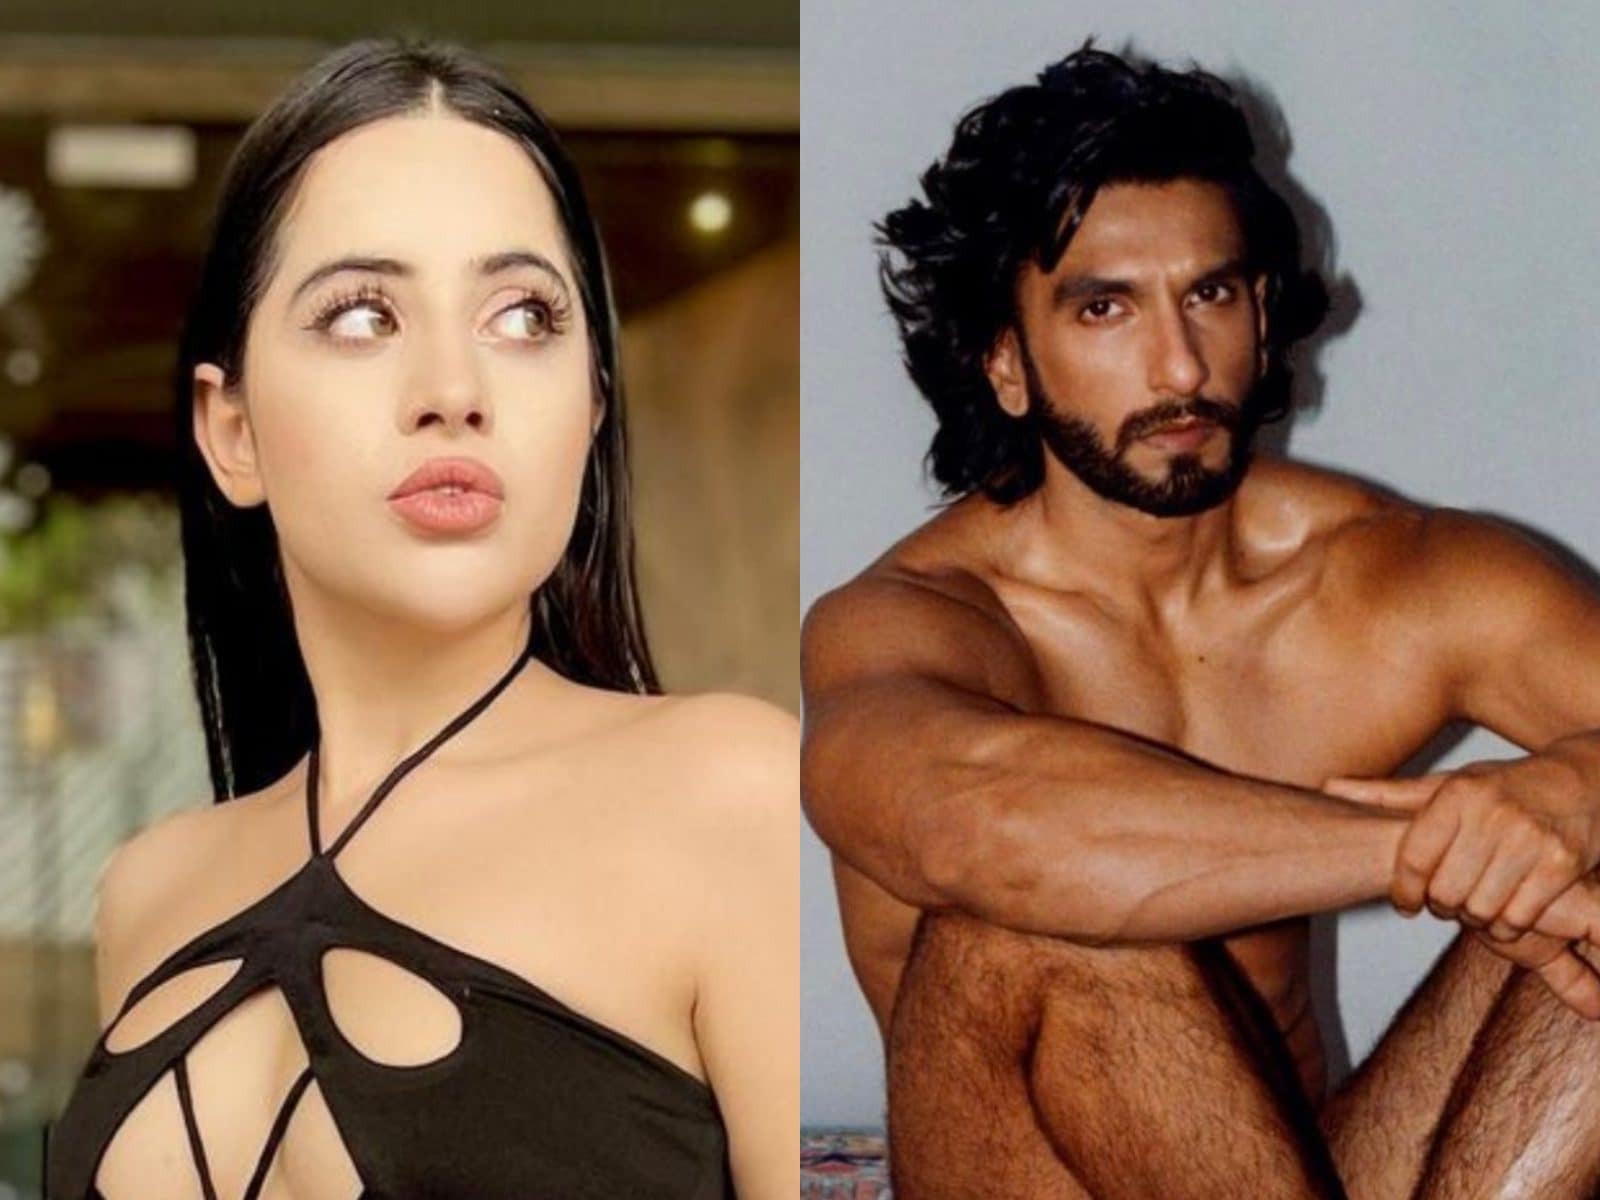 Sweta Tiwari Nude Pic - Uorfi Javed Reacts To Ranveer Singh's Nude Pictures, Says 'Nobody's  Sentiments Have Been Hurt' - News18